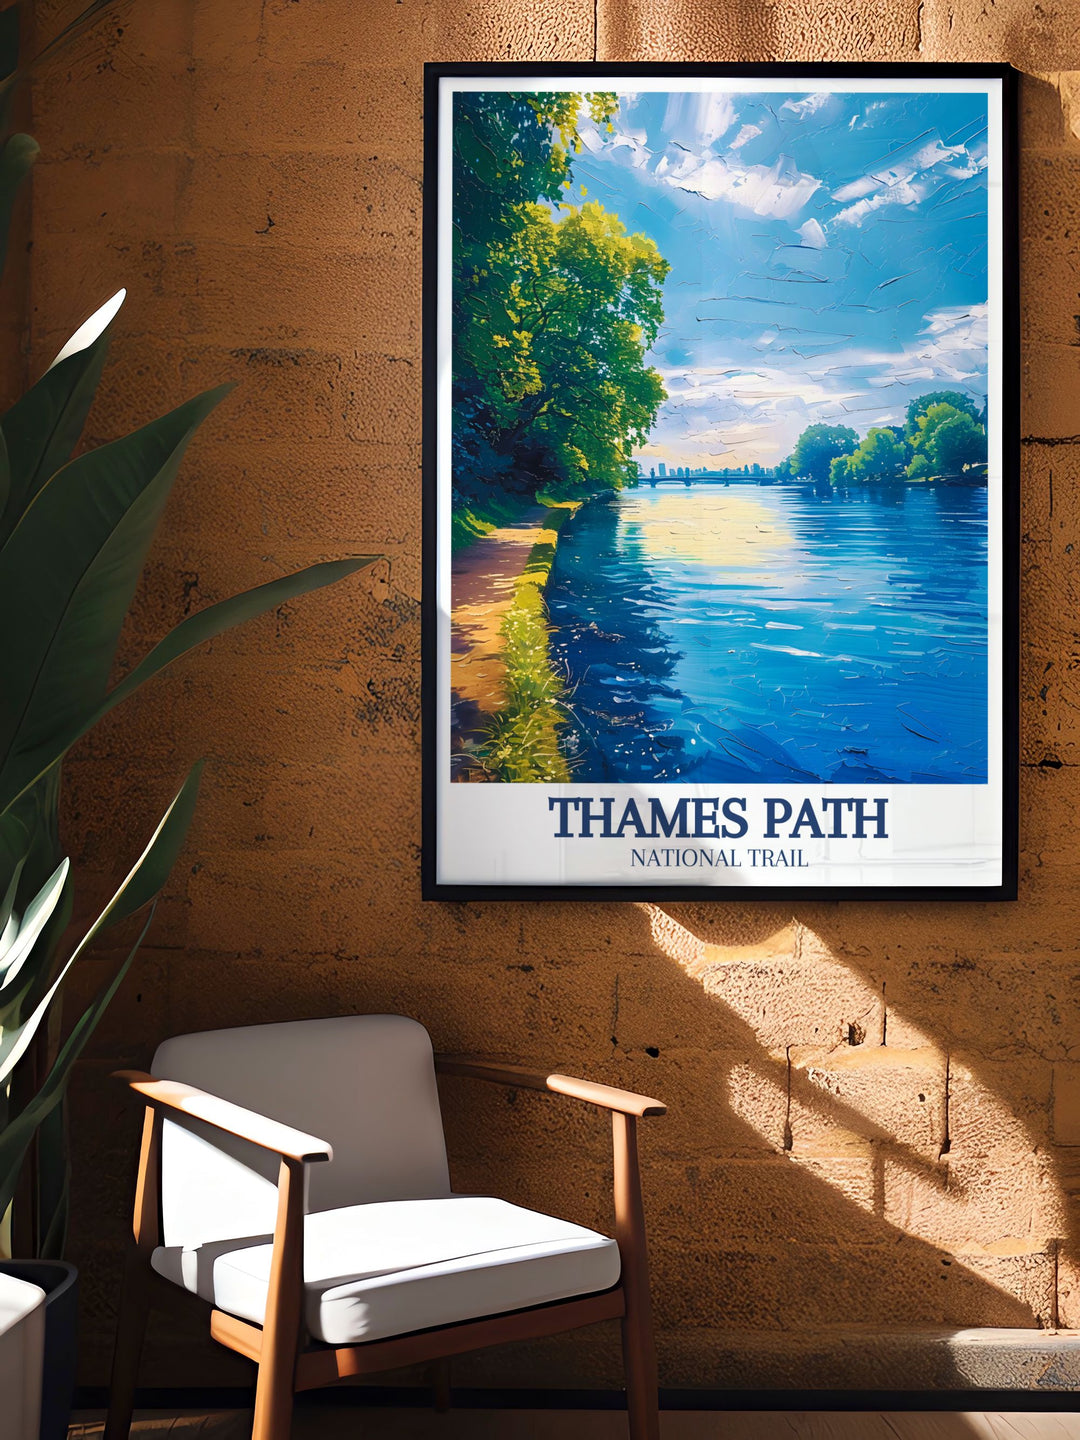 Stunning River Thames artwork capturing the serene beauty of the river as it winds through Richmond London perfect for gifts and enhancing the aesthetic appeal of any room with Londons iconic river